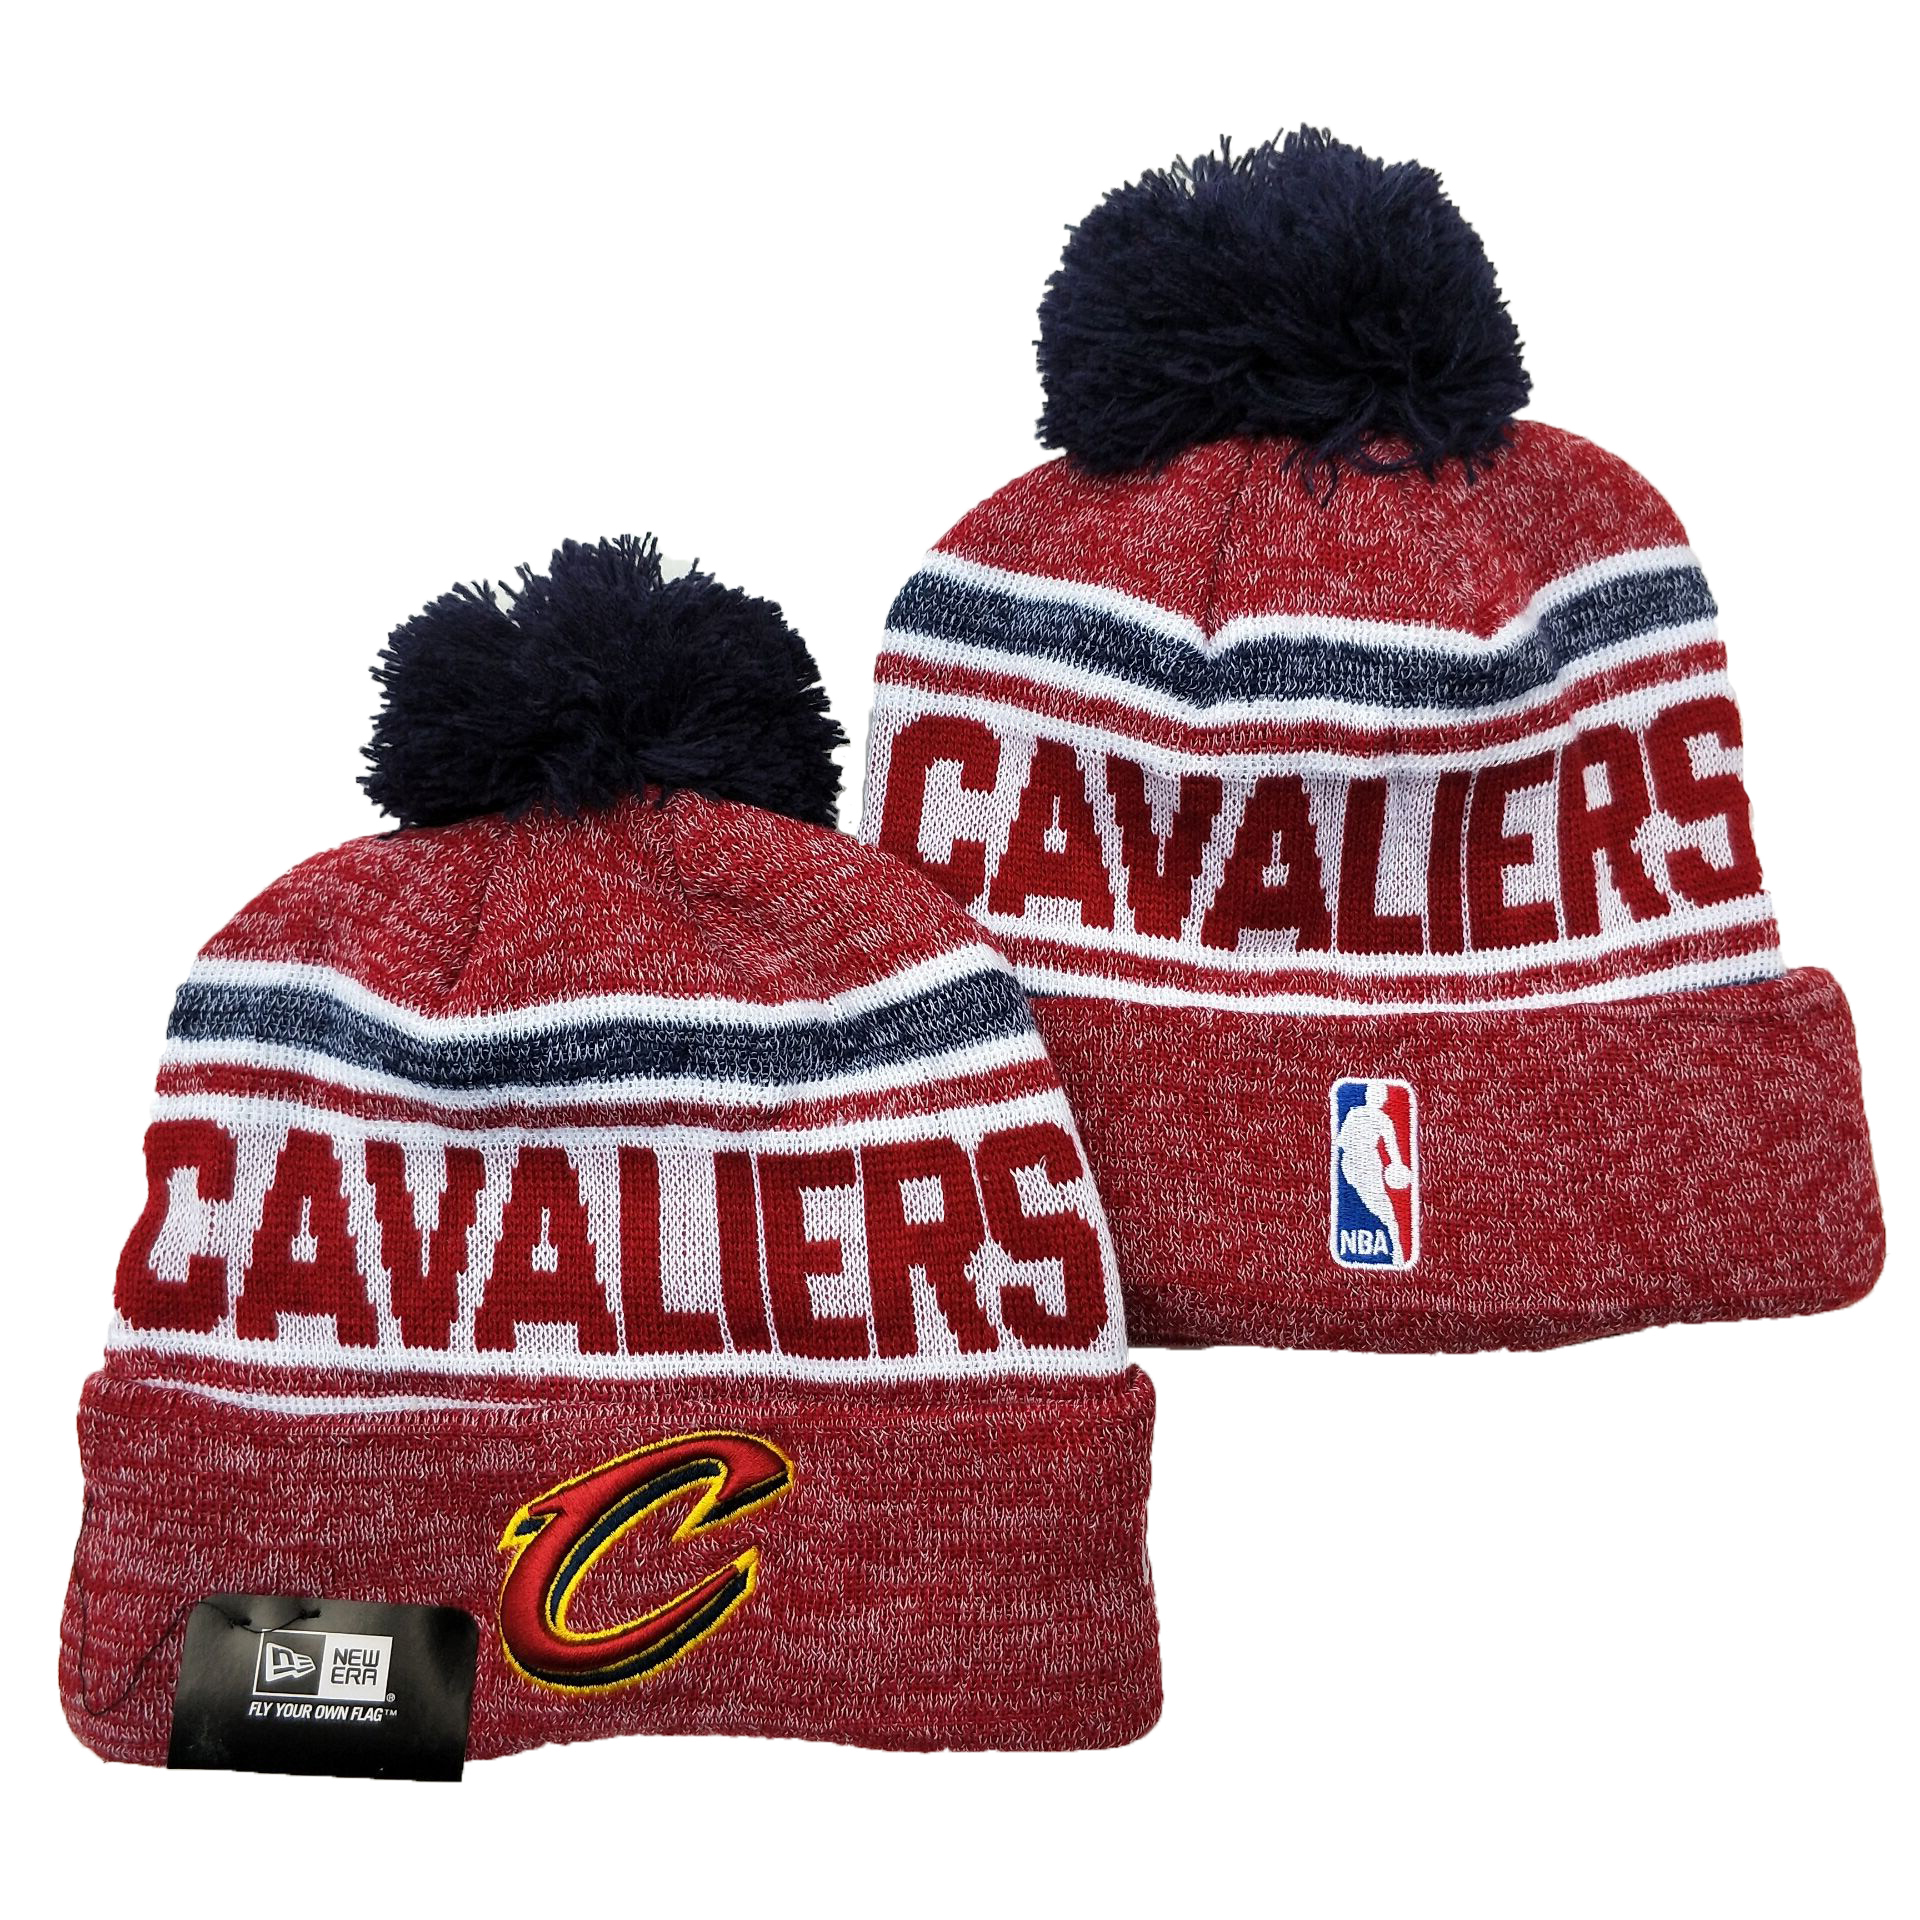 NBA Cleveland Cavaliers Knit Hats 001